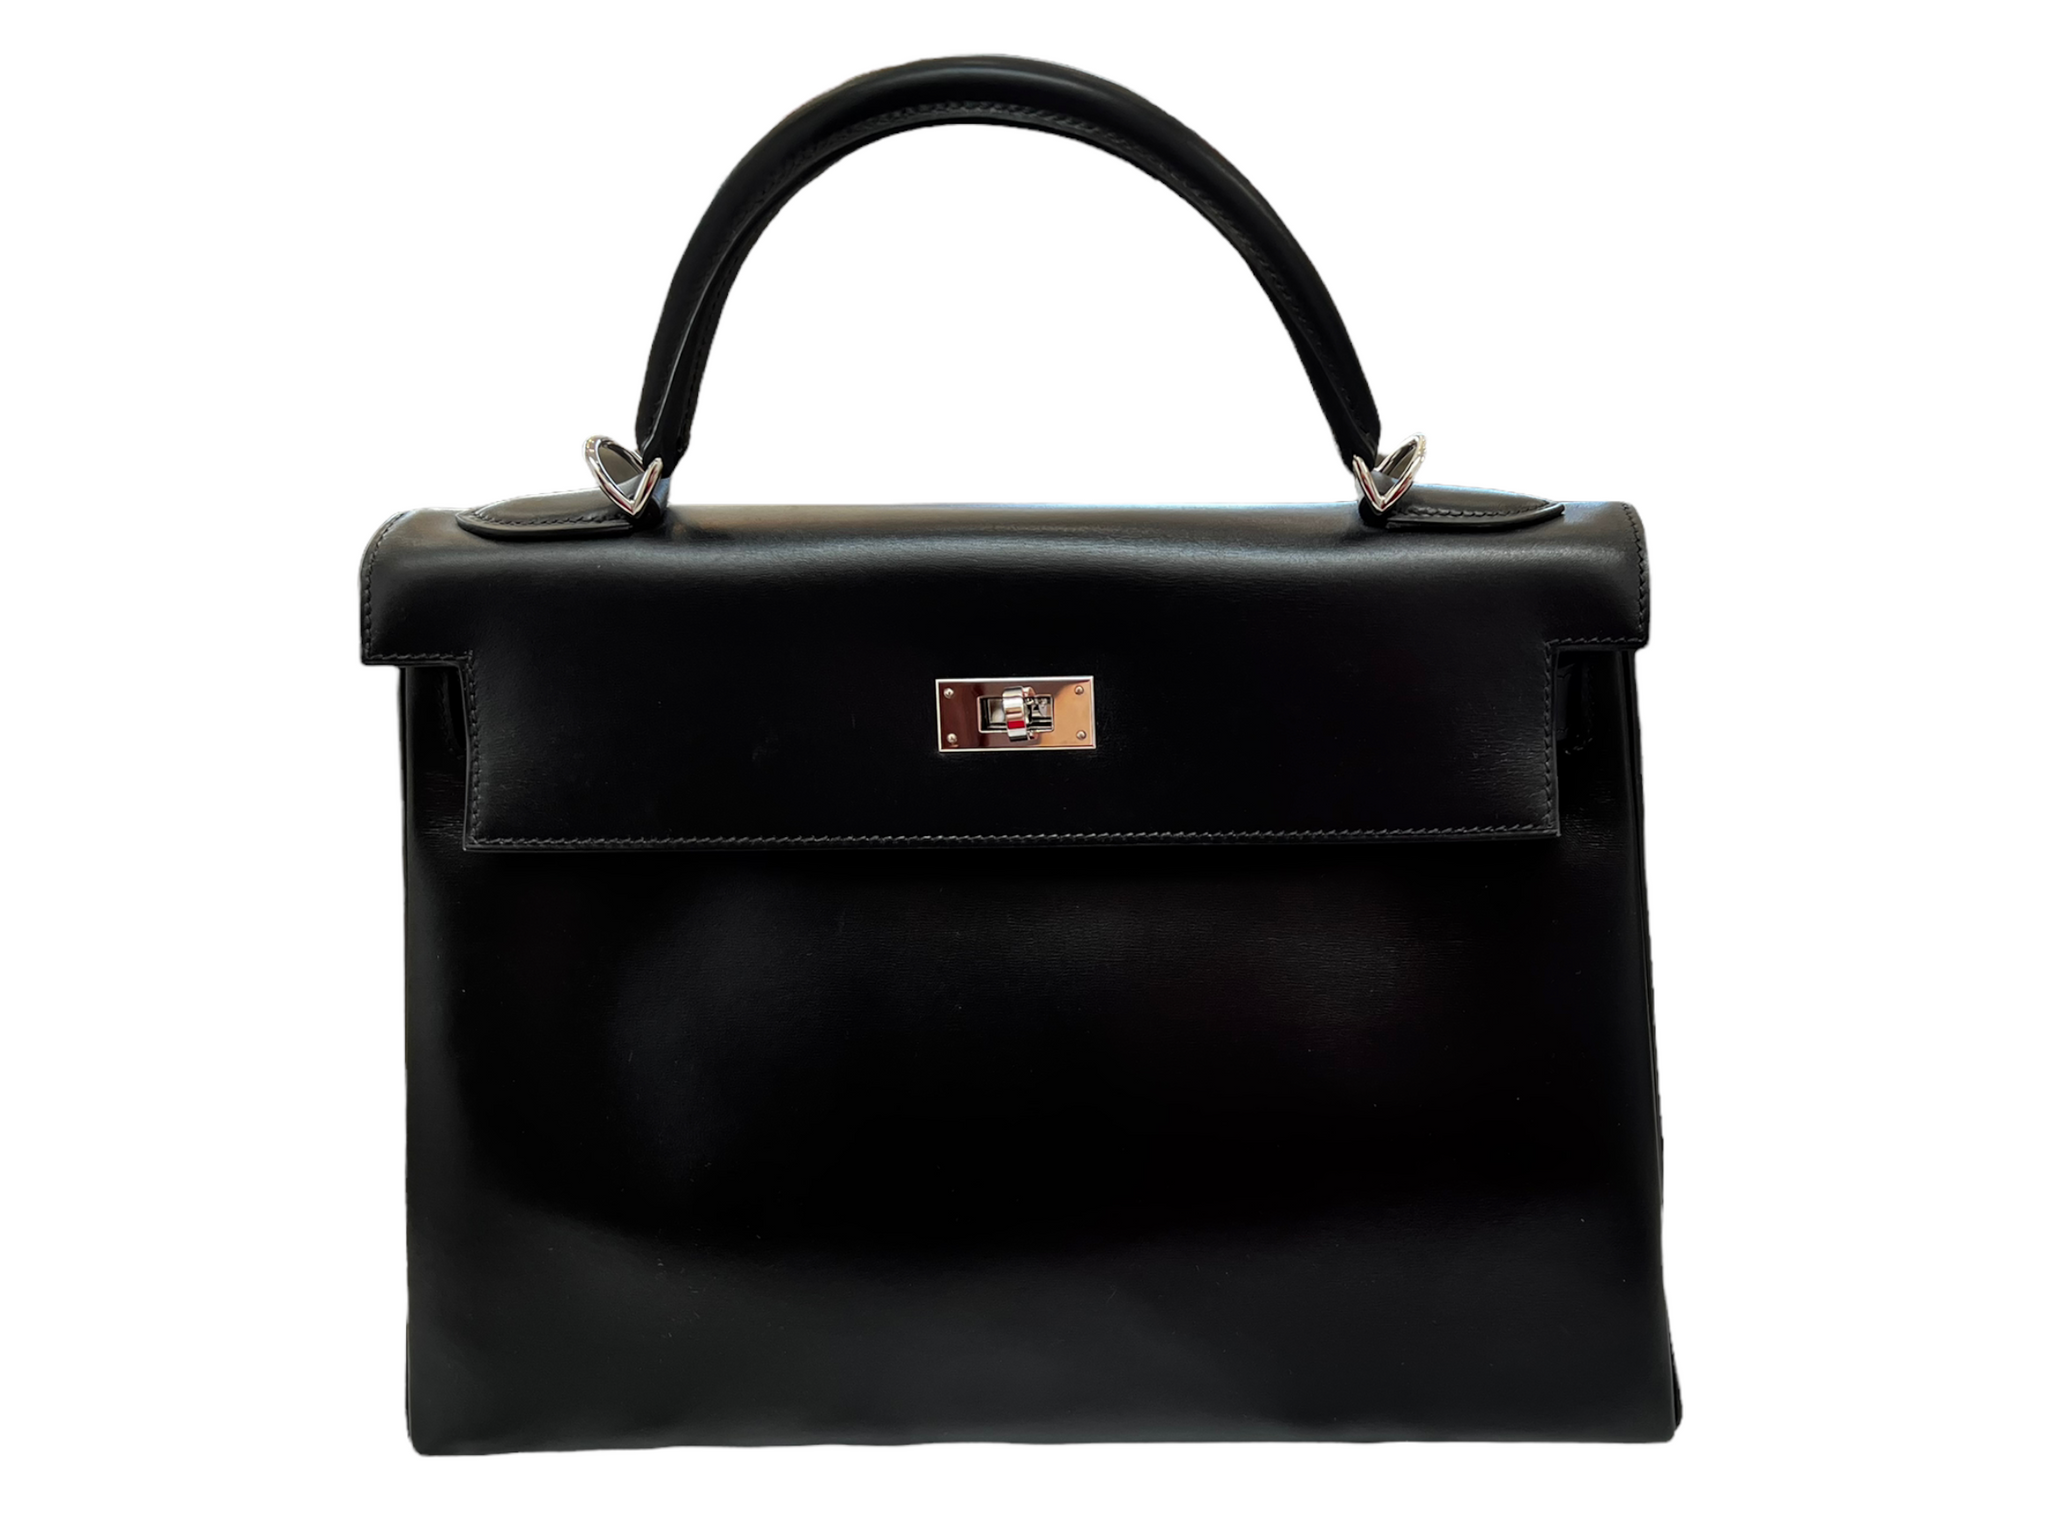 Authenticated Used Hermes Kelly 32 Outer Stitched Box Calf Black 〇V  Engraved Handbag 